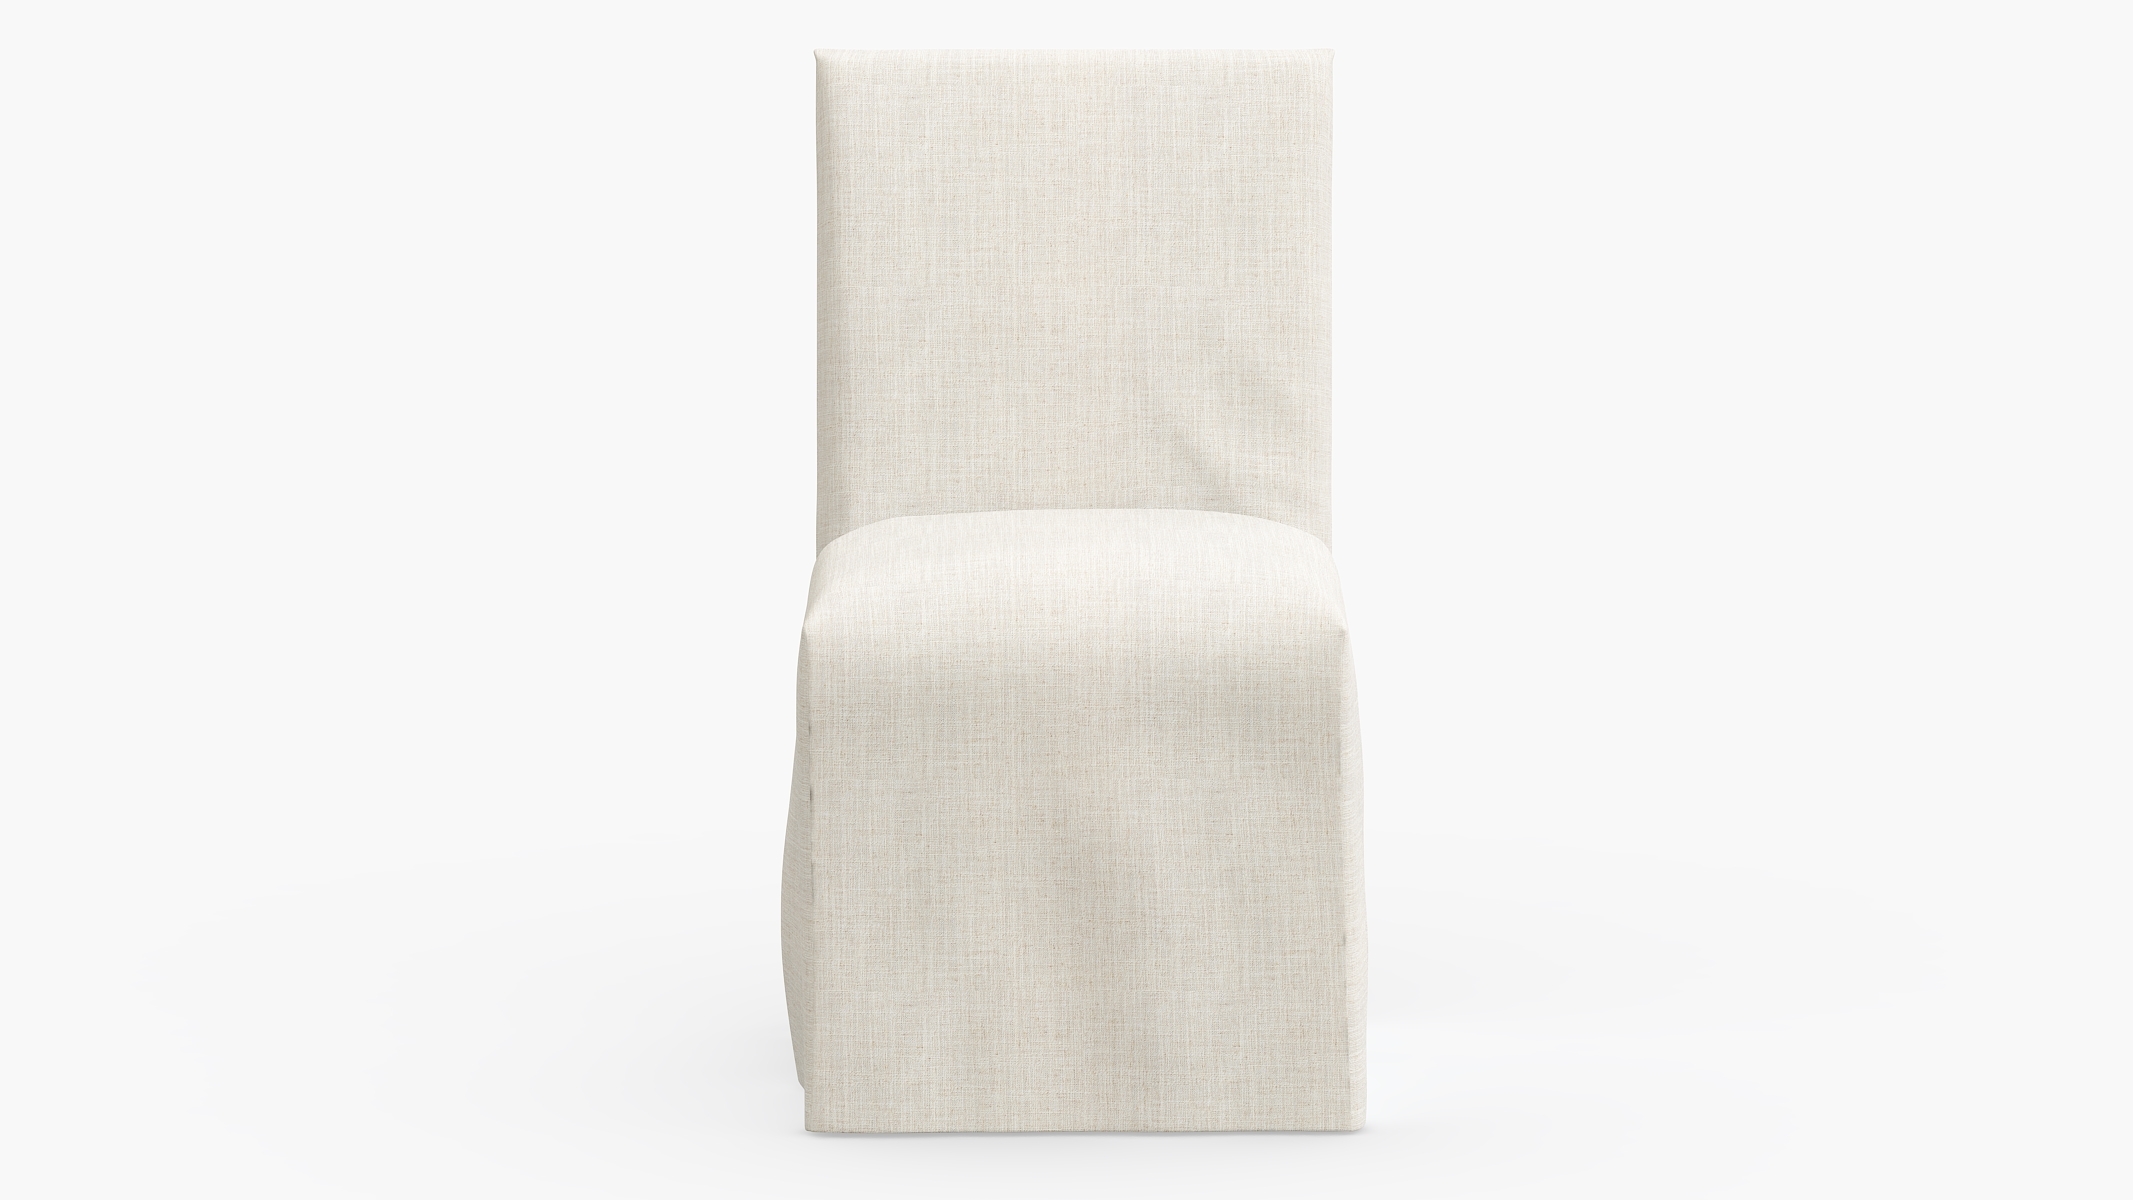 Slipcovered Dining Chair, Talc Everyday Linen - Image 1